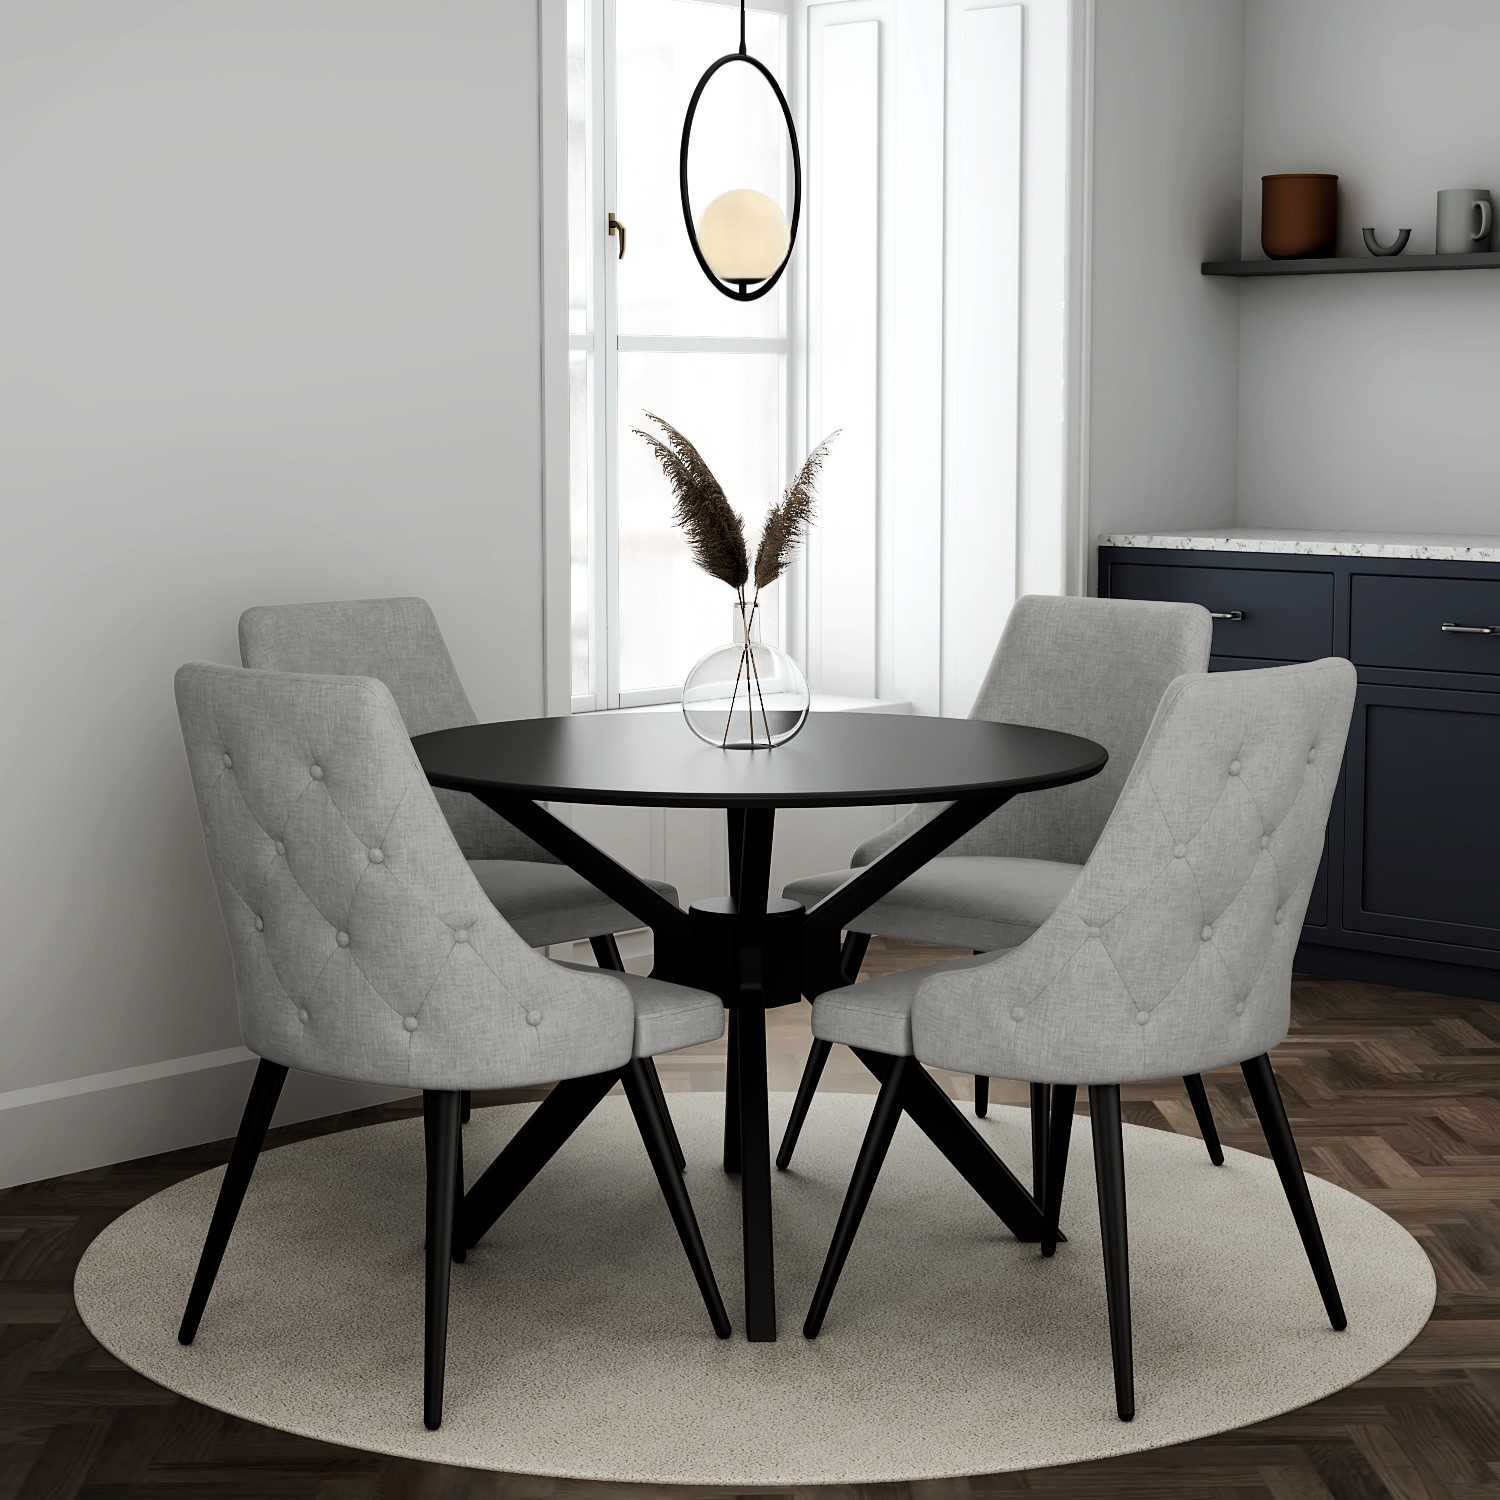 Black Round Dining Table With 4 Grey, Large Round Dining Room Table Seats 123 Go